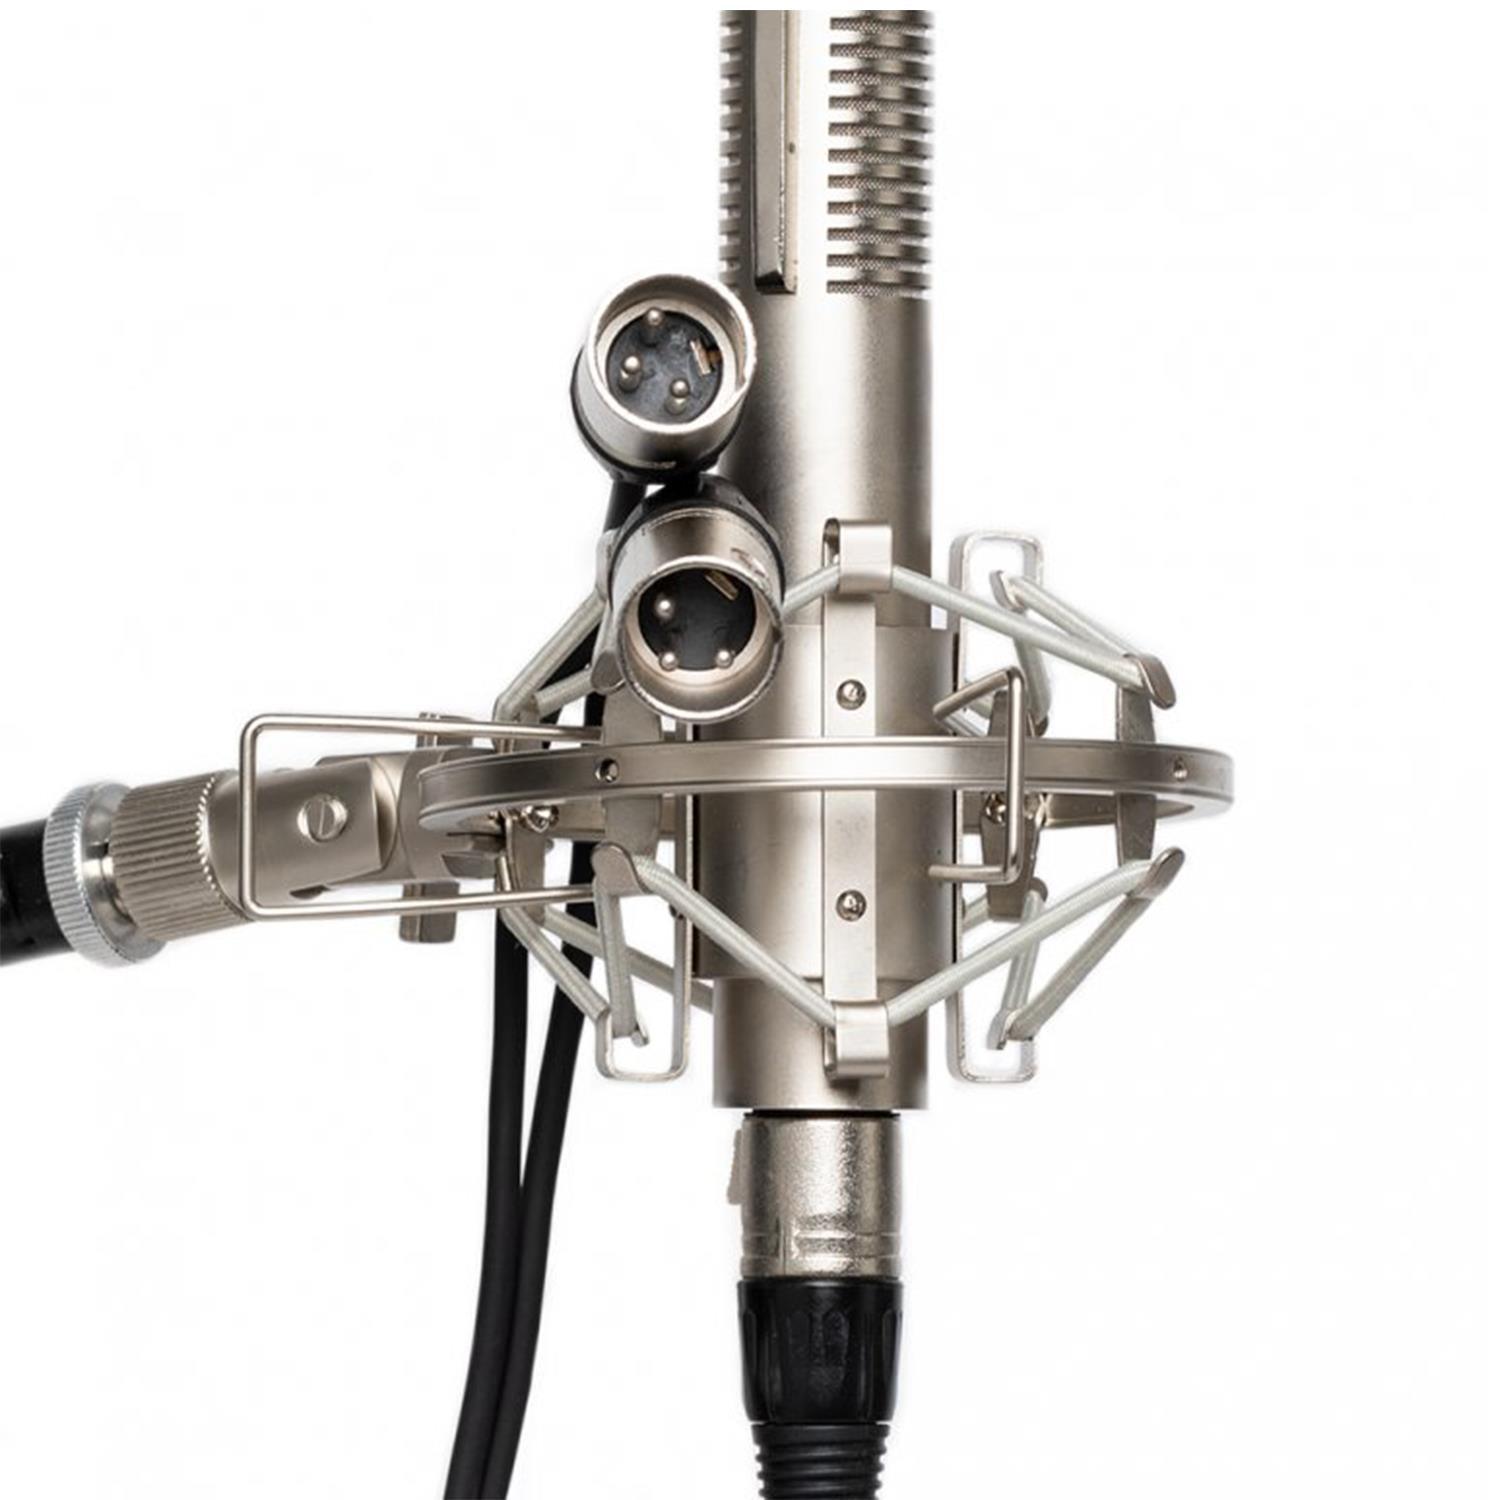 Stagg SRM75S Stereo Ribbon Microphone - DY Pro Audio